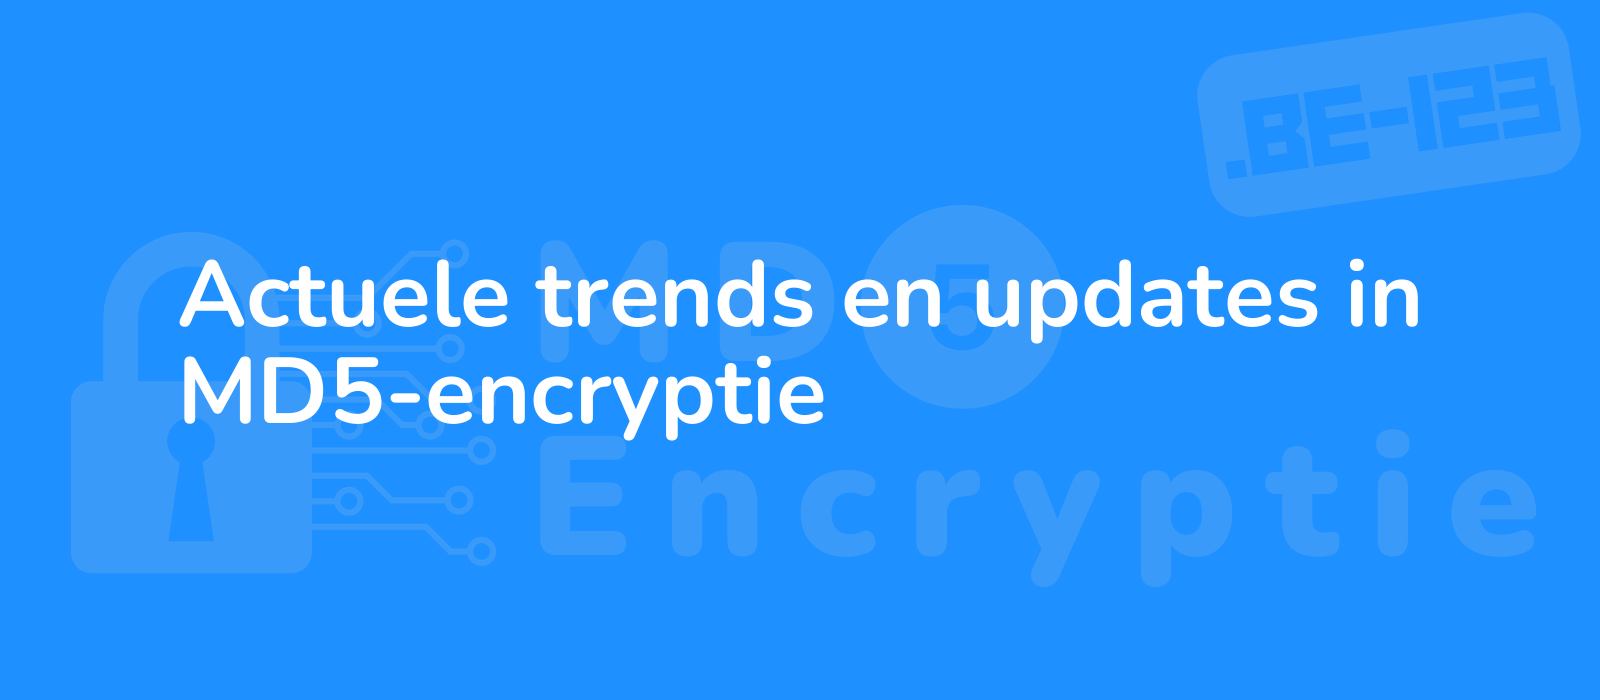 dynamic representation of md5 encryption trends and updates depicted with striking visuals and vibrant colors 8k resolution